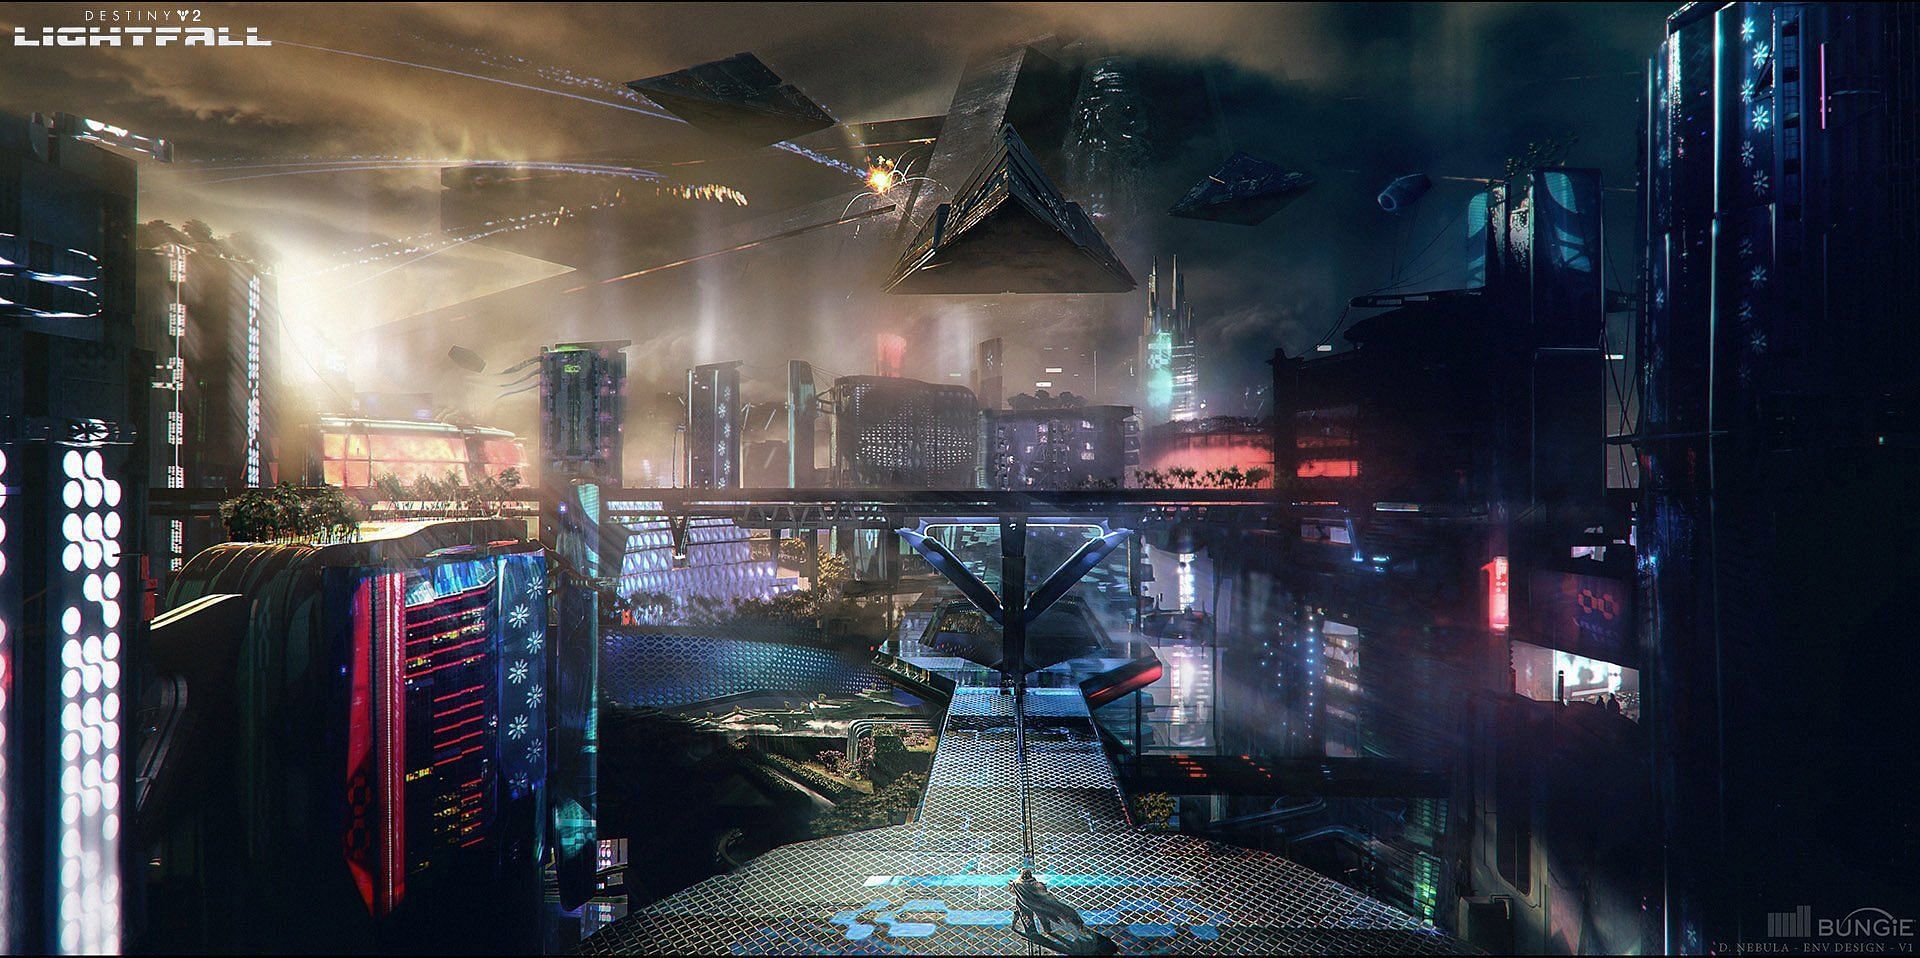 A new raid is on the cards for Desitny 2 Lightfall (Image via Bungie)